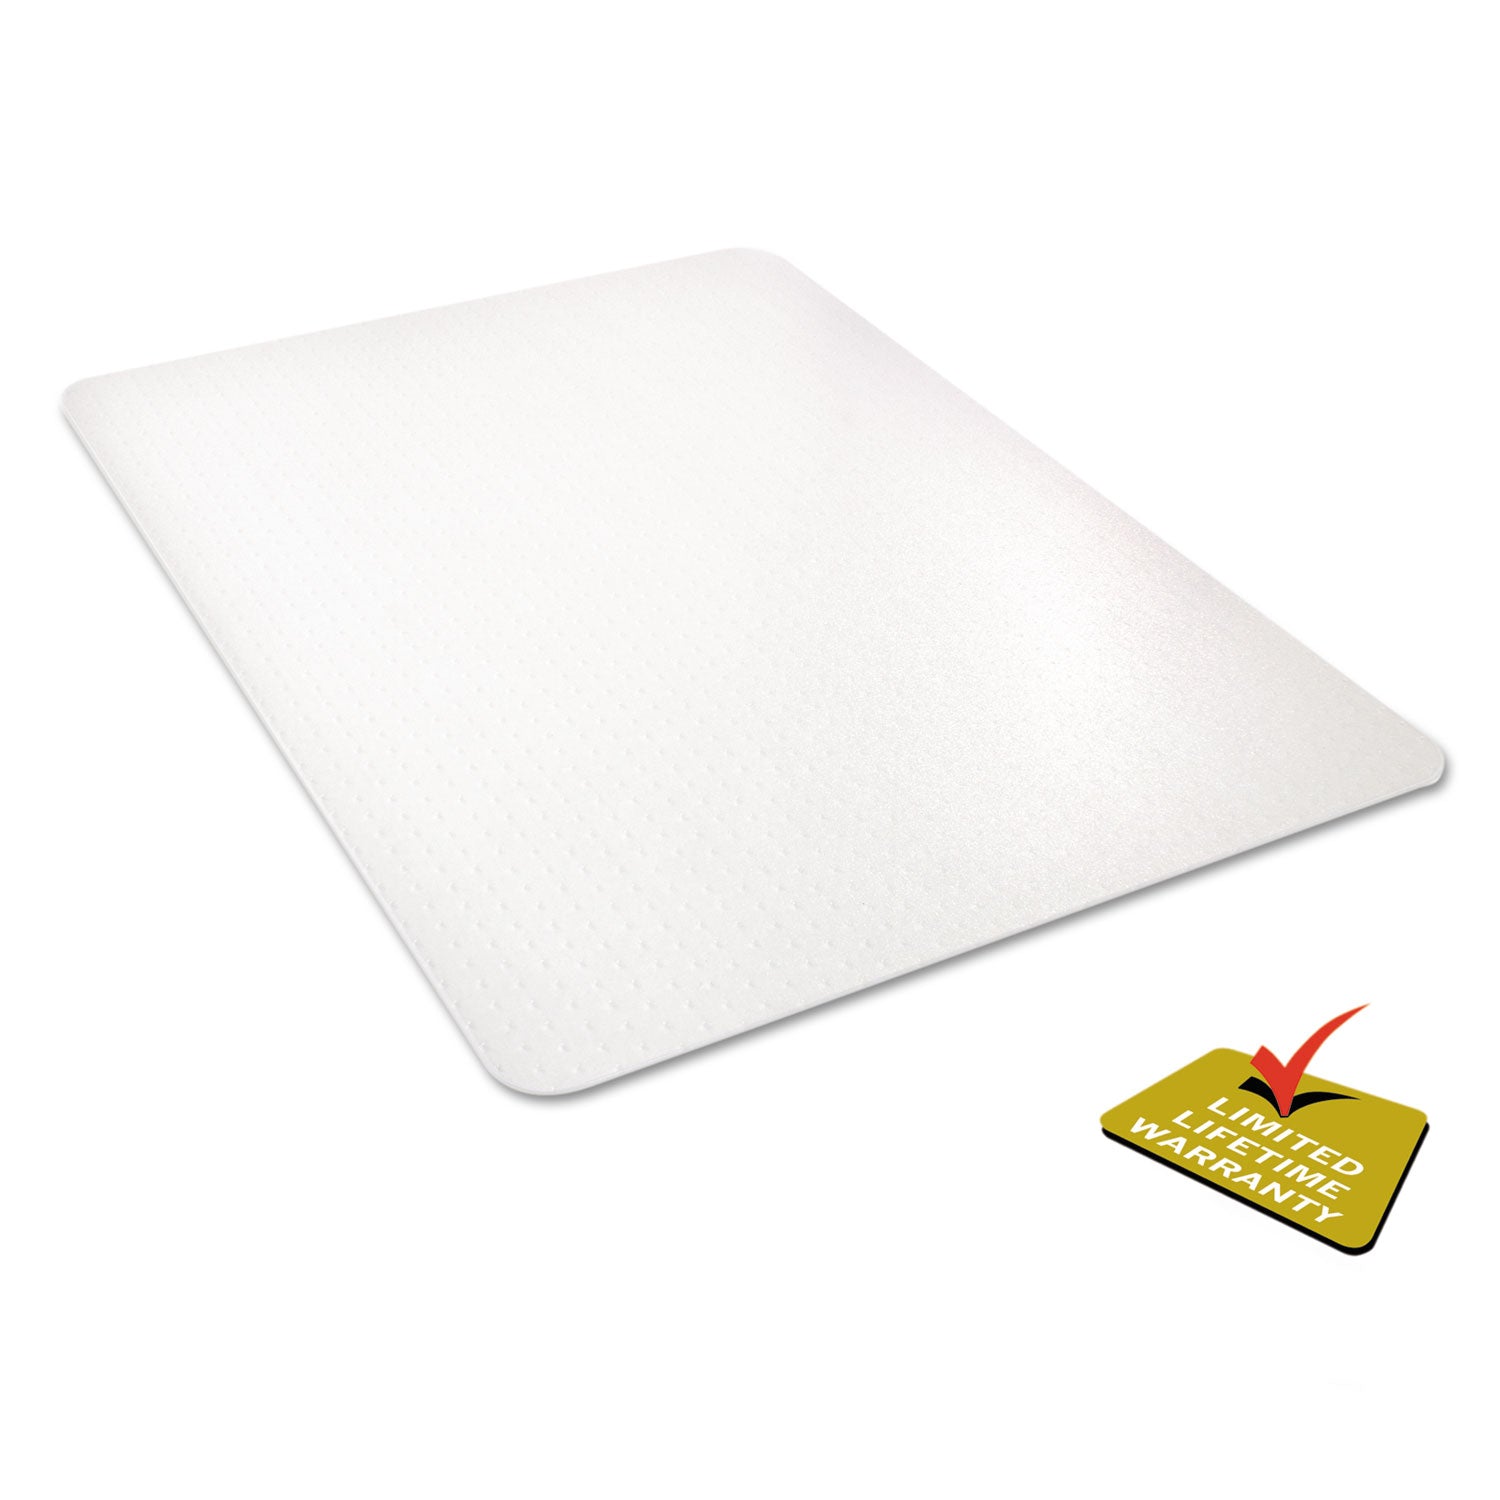 All Day Use Chair Mat - All Carpet Types, 45 x 53, Rectangle, Clear - 